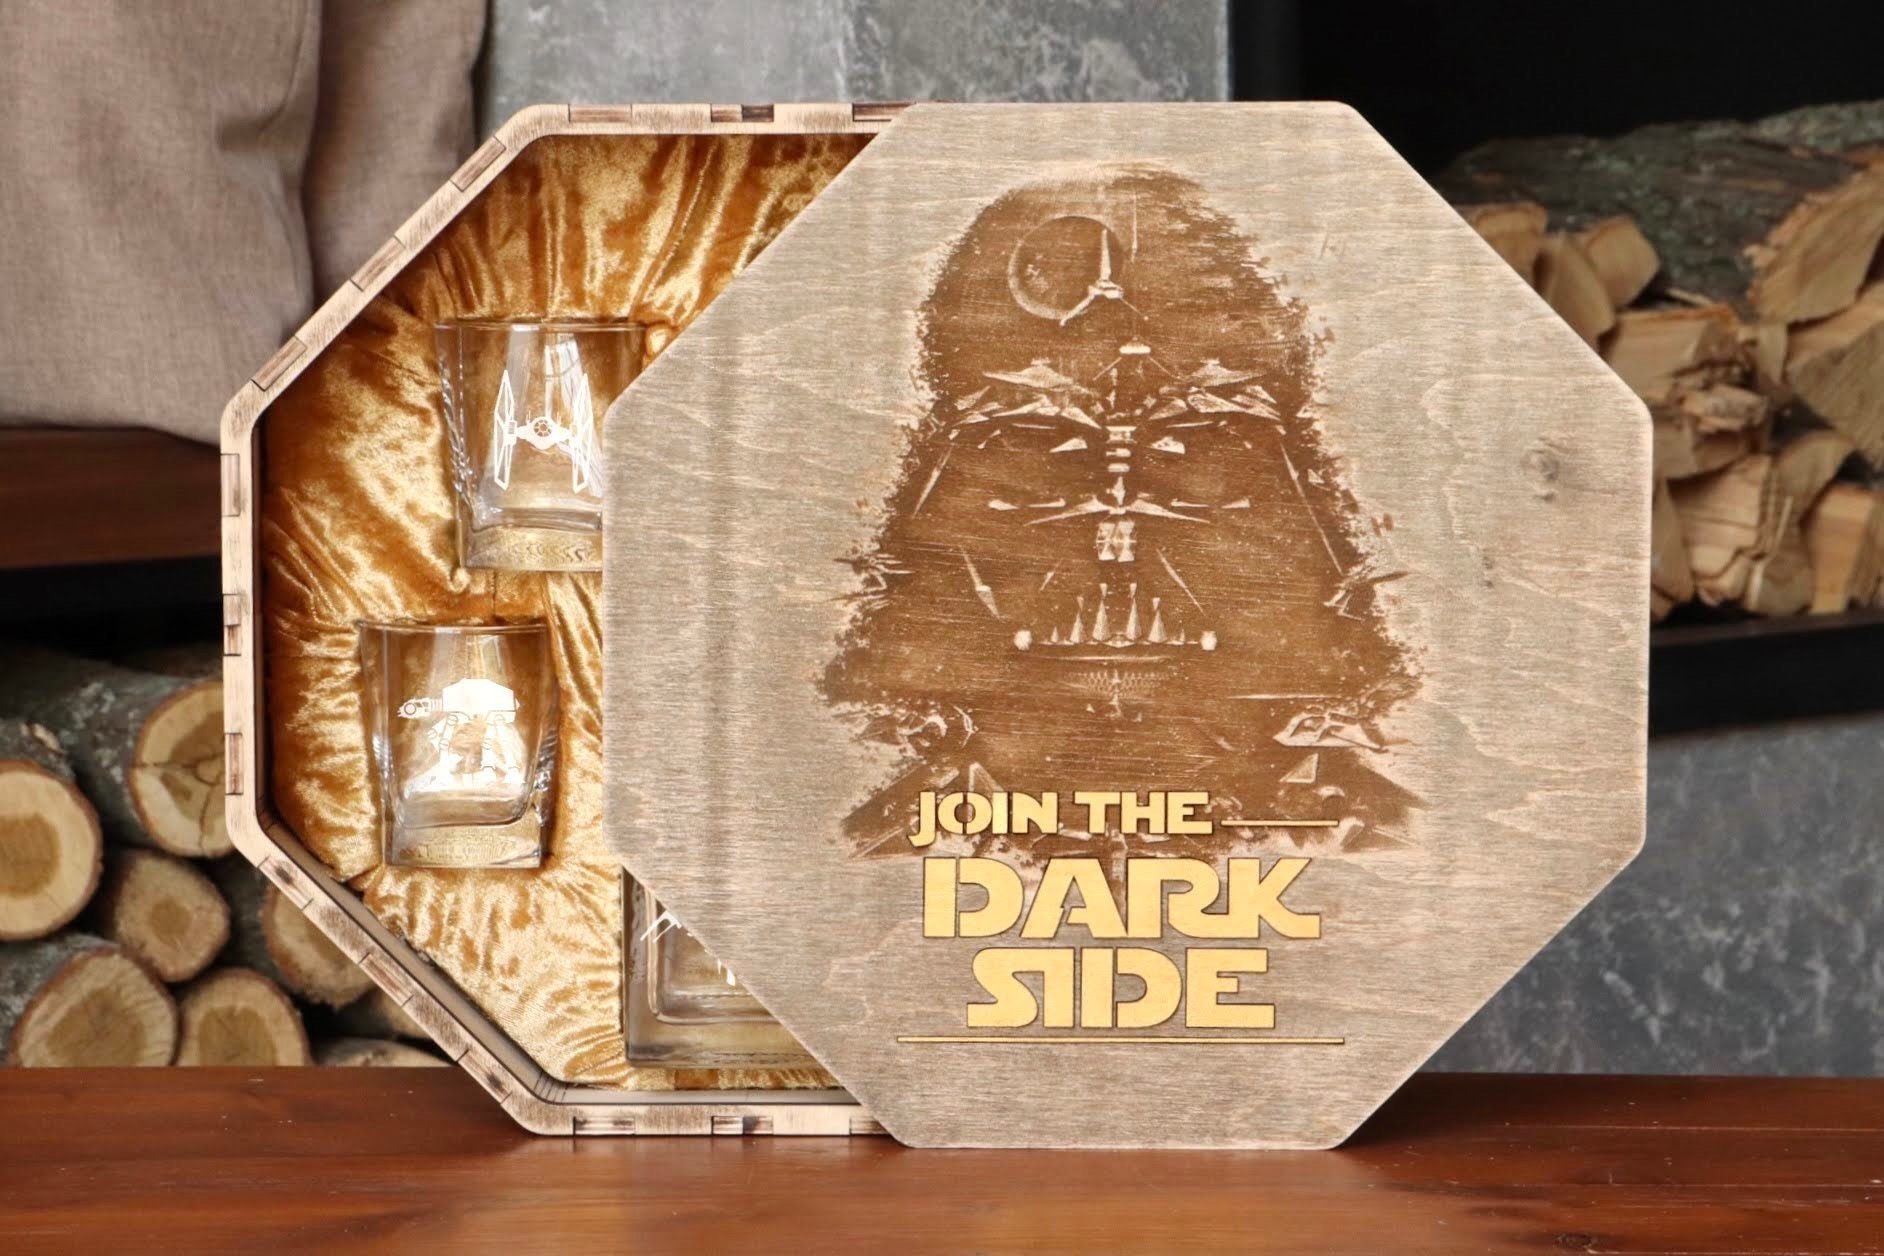 I love Star Wars - MINGYALL Transparent Creative Whiskey Decanter